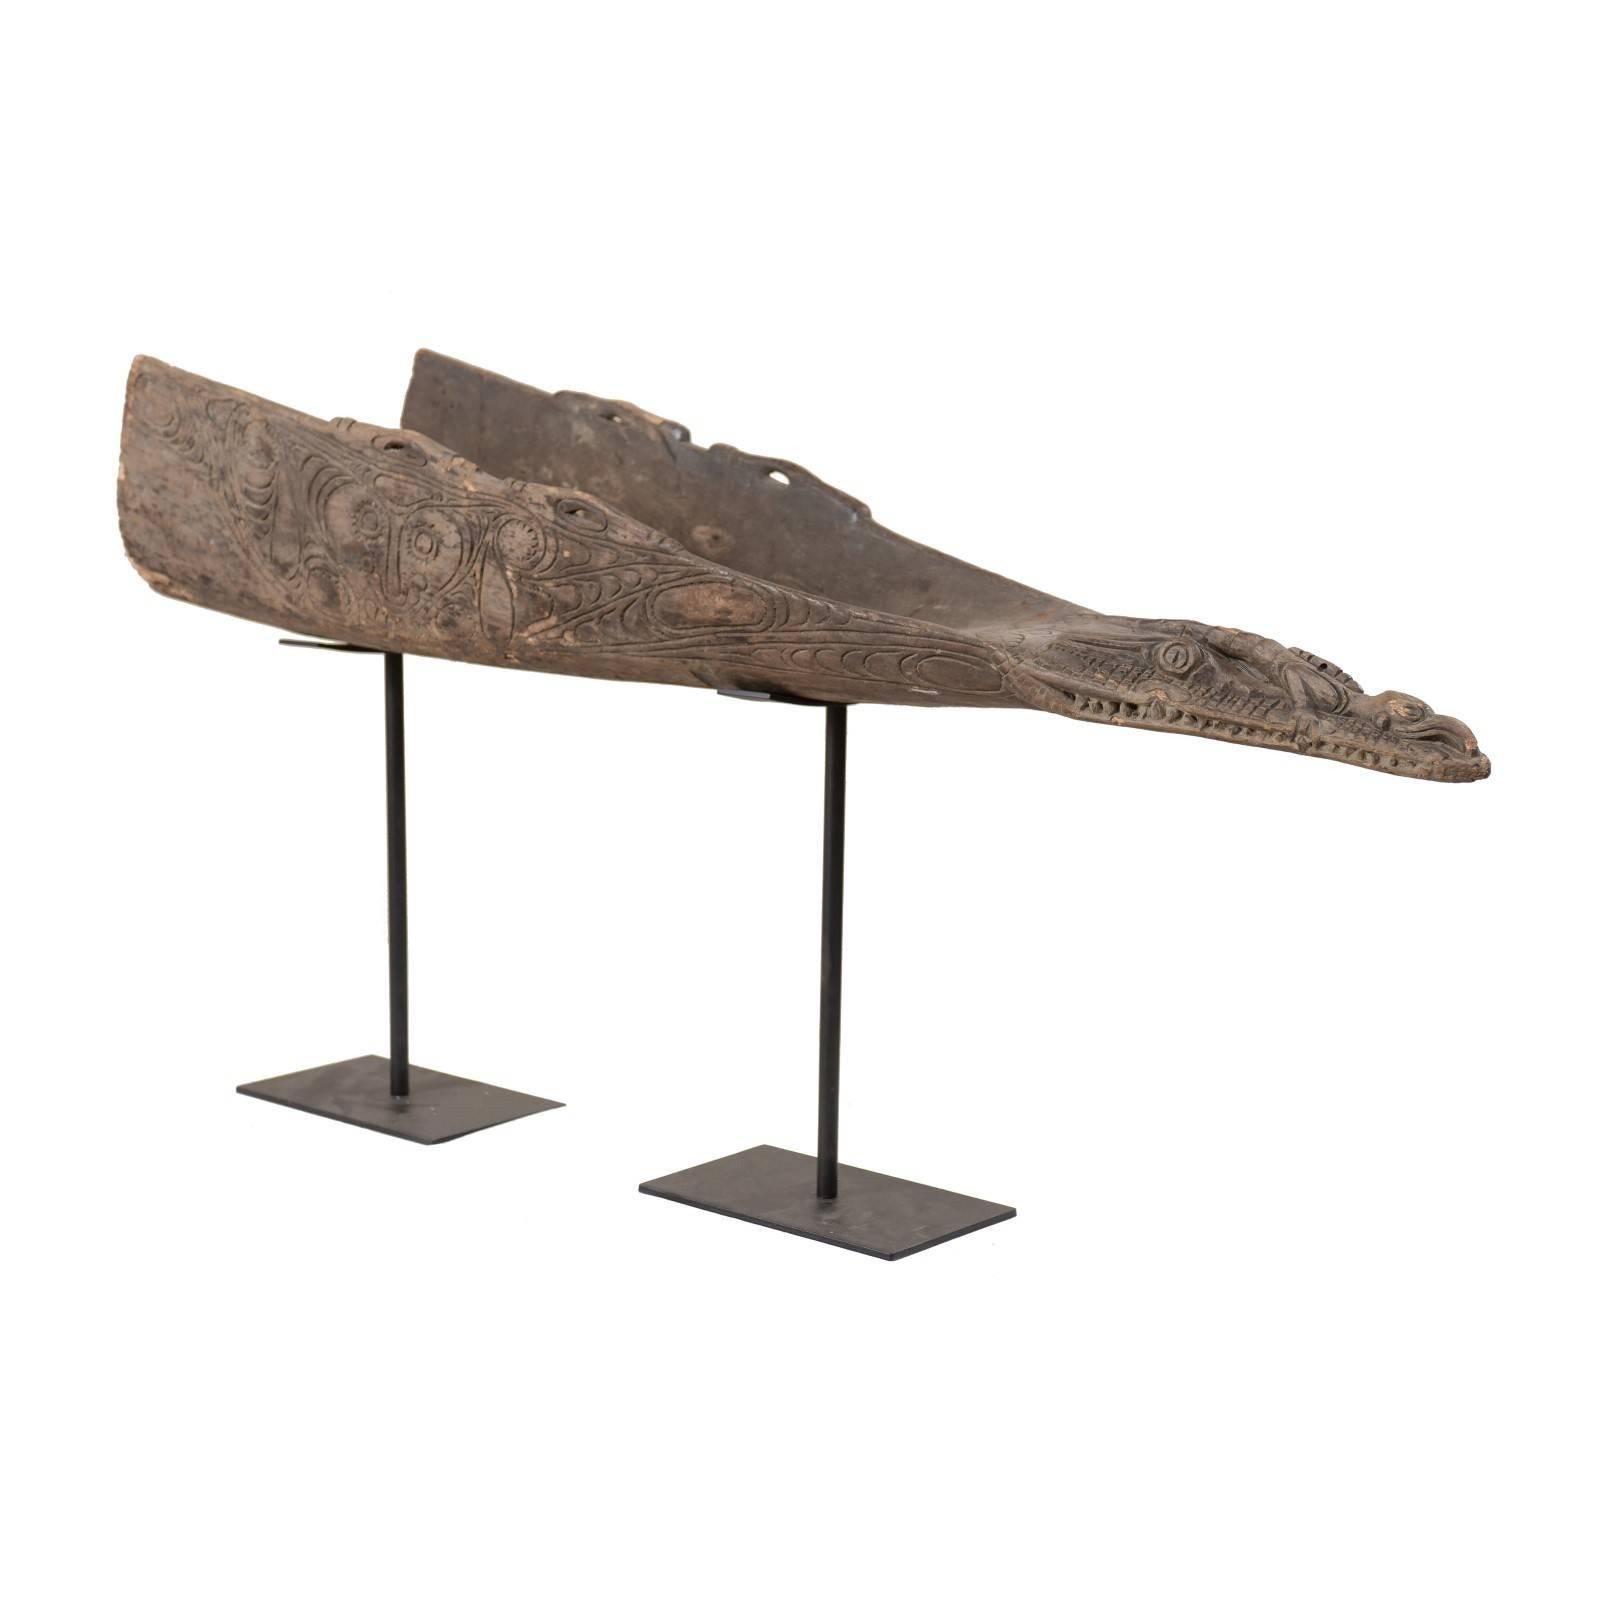 Hand-Carved Wood Boat Prow on Iron Stand from Papua New Guinea, Mid-20th Century